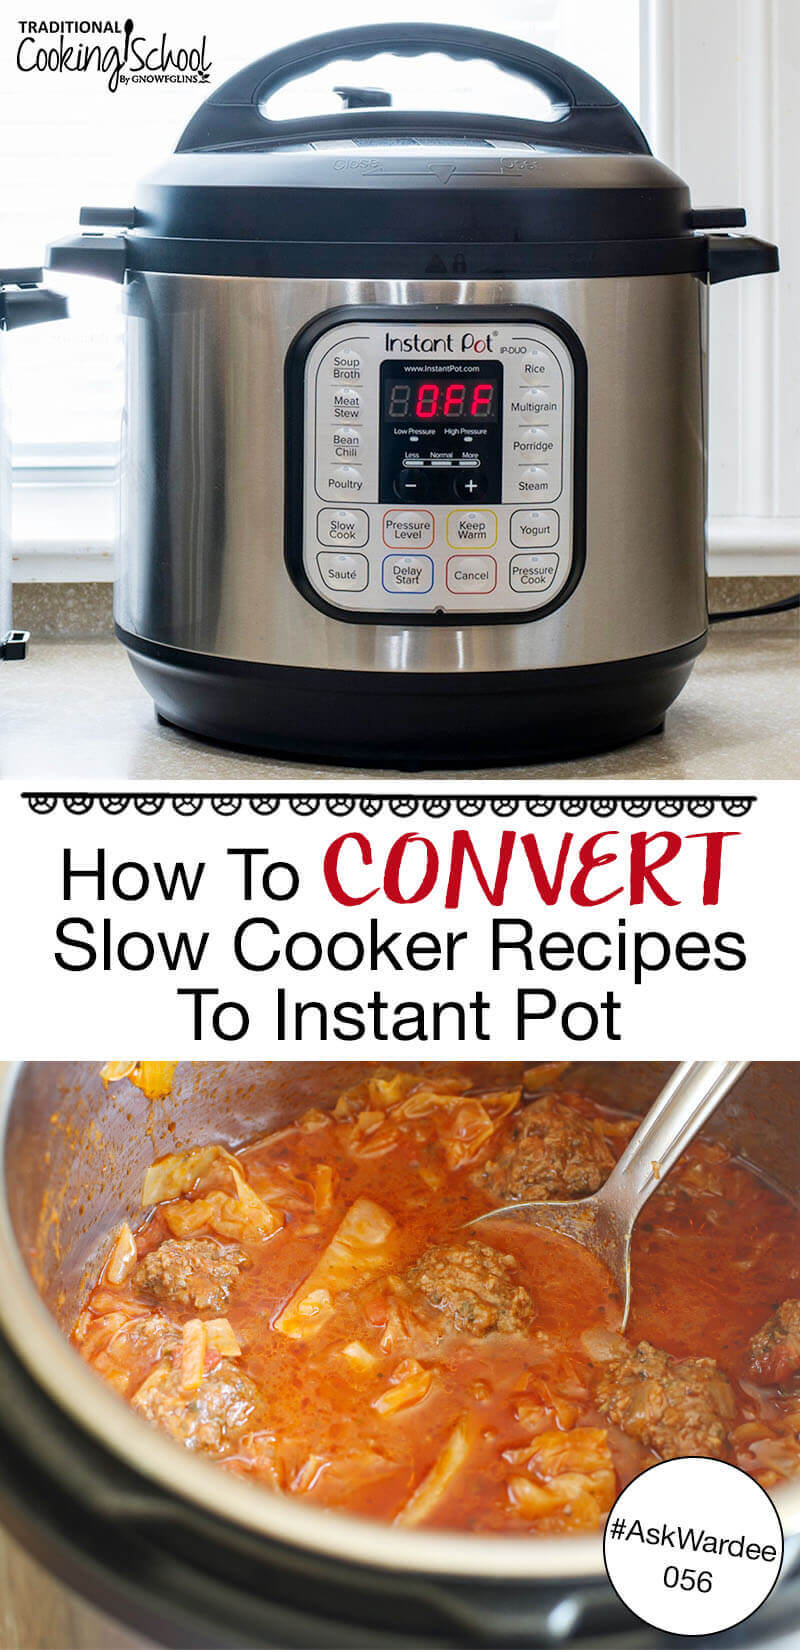 Photo collage of an Instant Pot on a countertop, and meatball and cabbage soup in an Instant Pot. Text overlay says: "How To Convert Slow Cooker Recipes To Instant Pot #AskWardee 056"